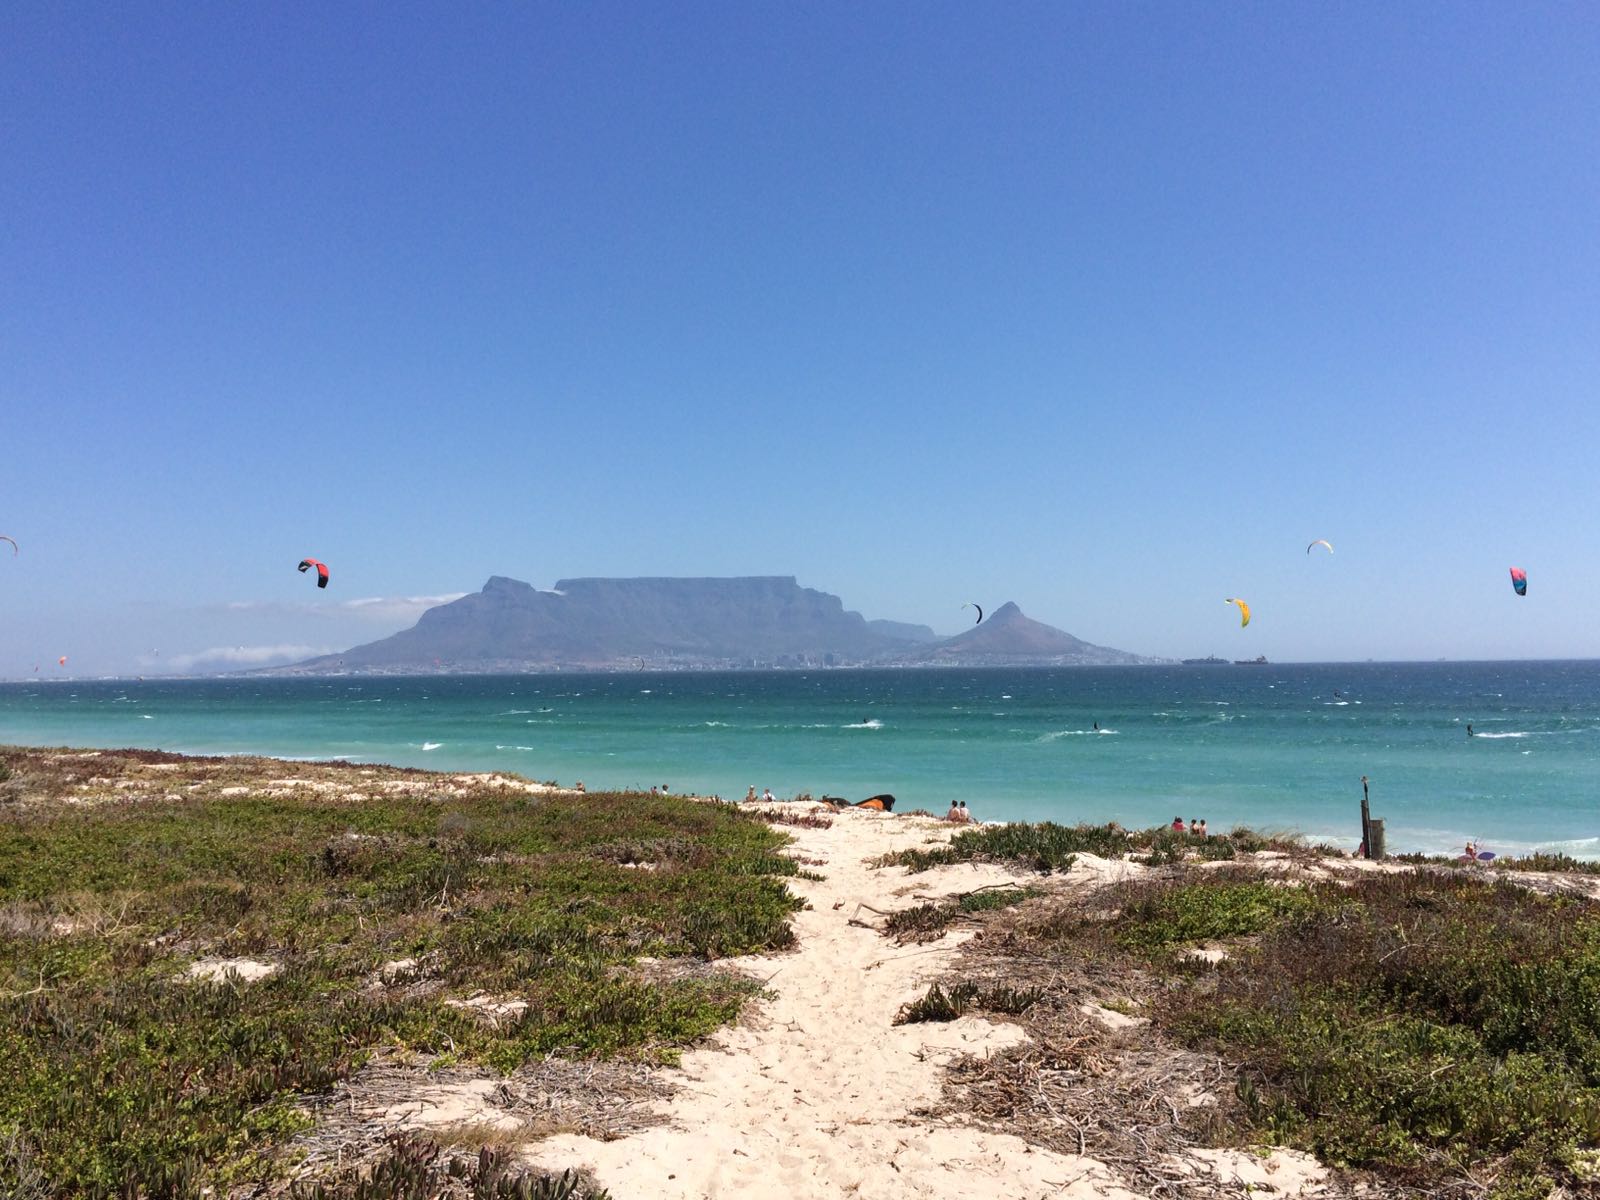 View of Table Mountain from Blouberg, South Africa